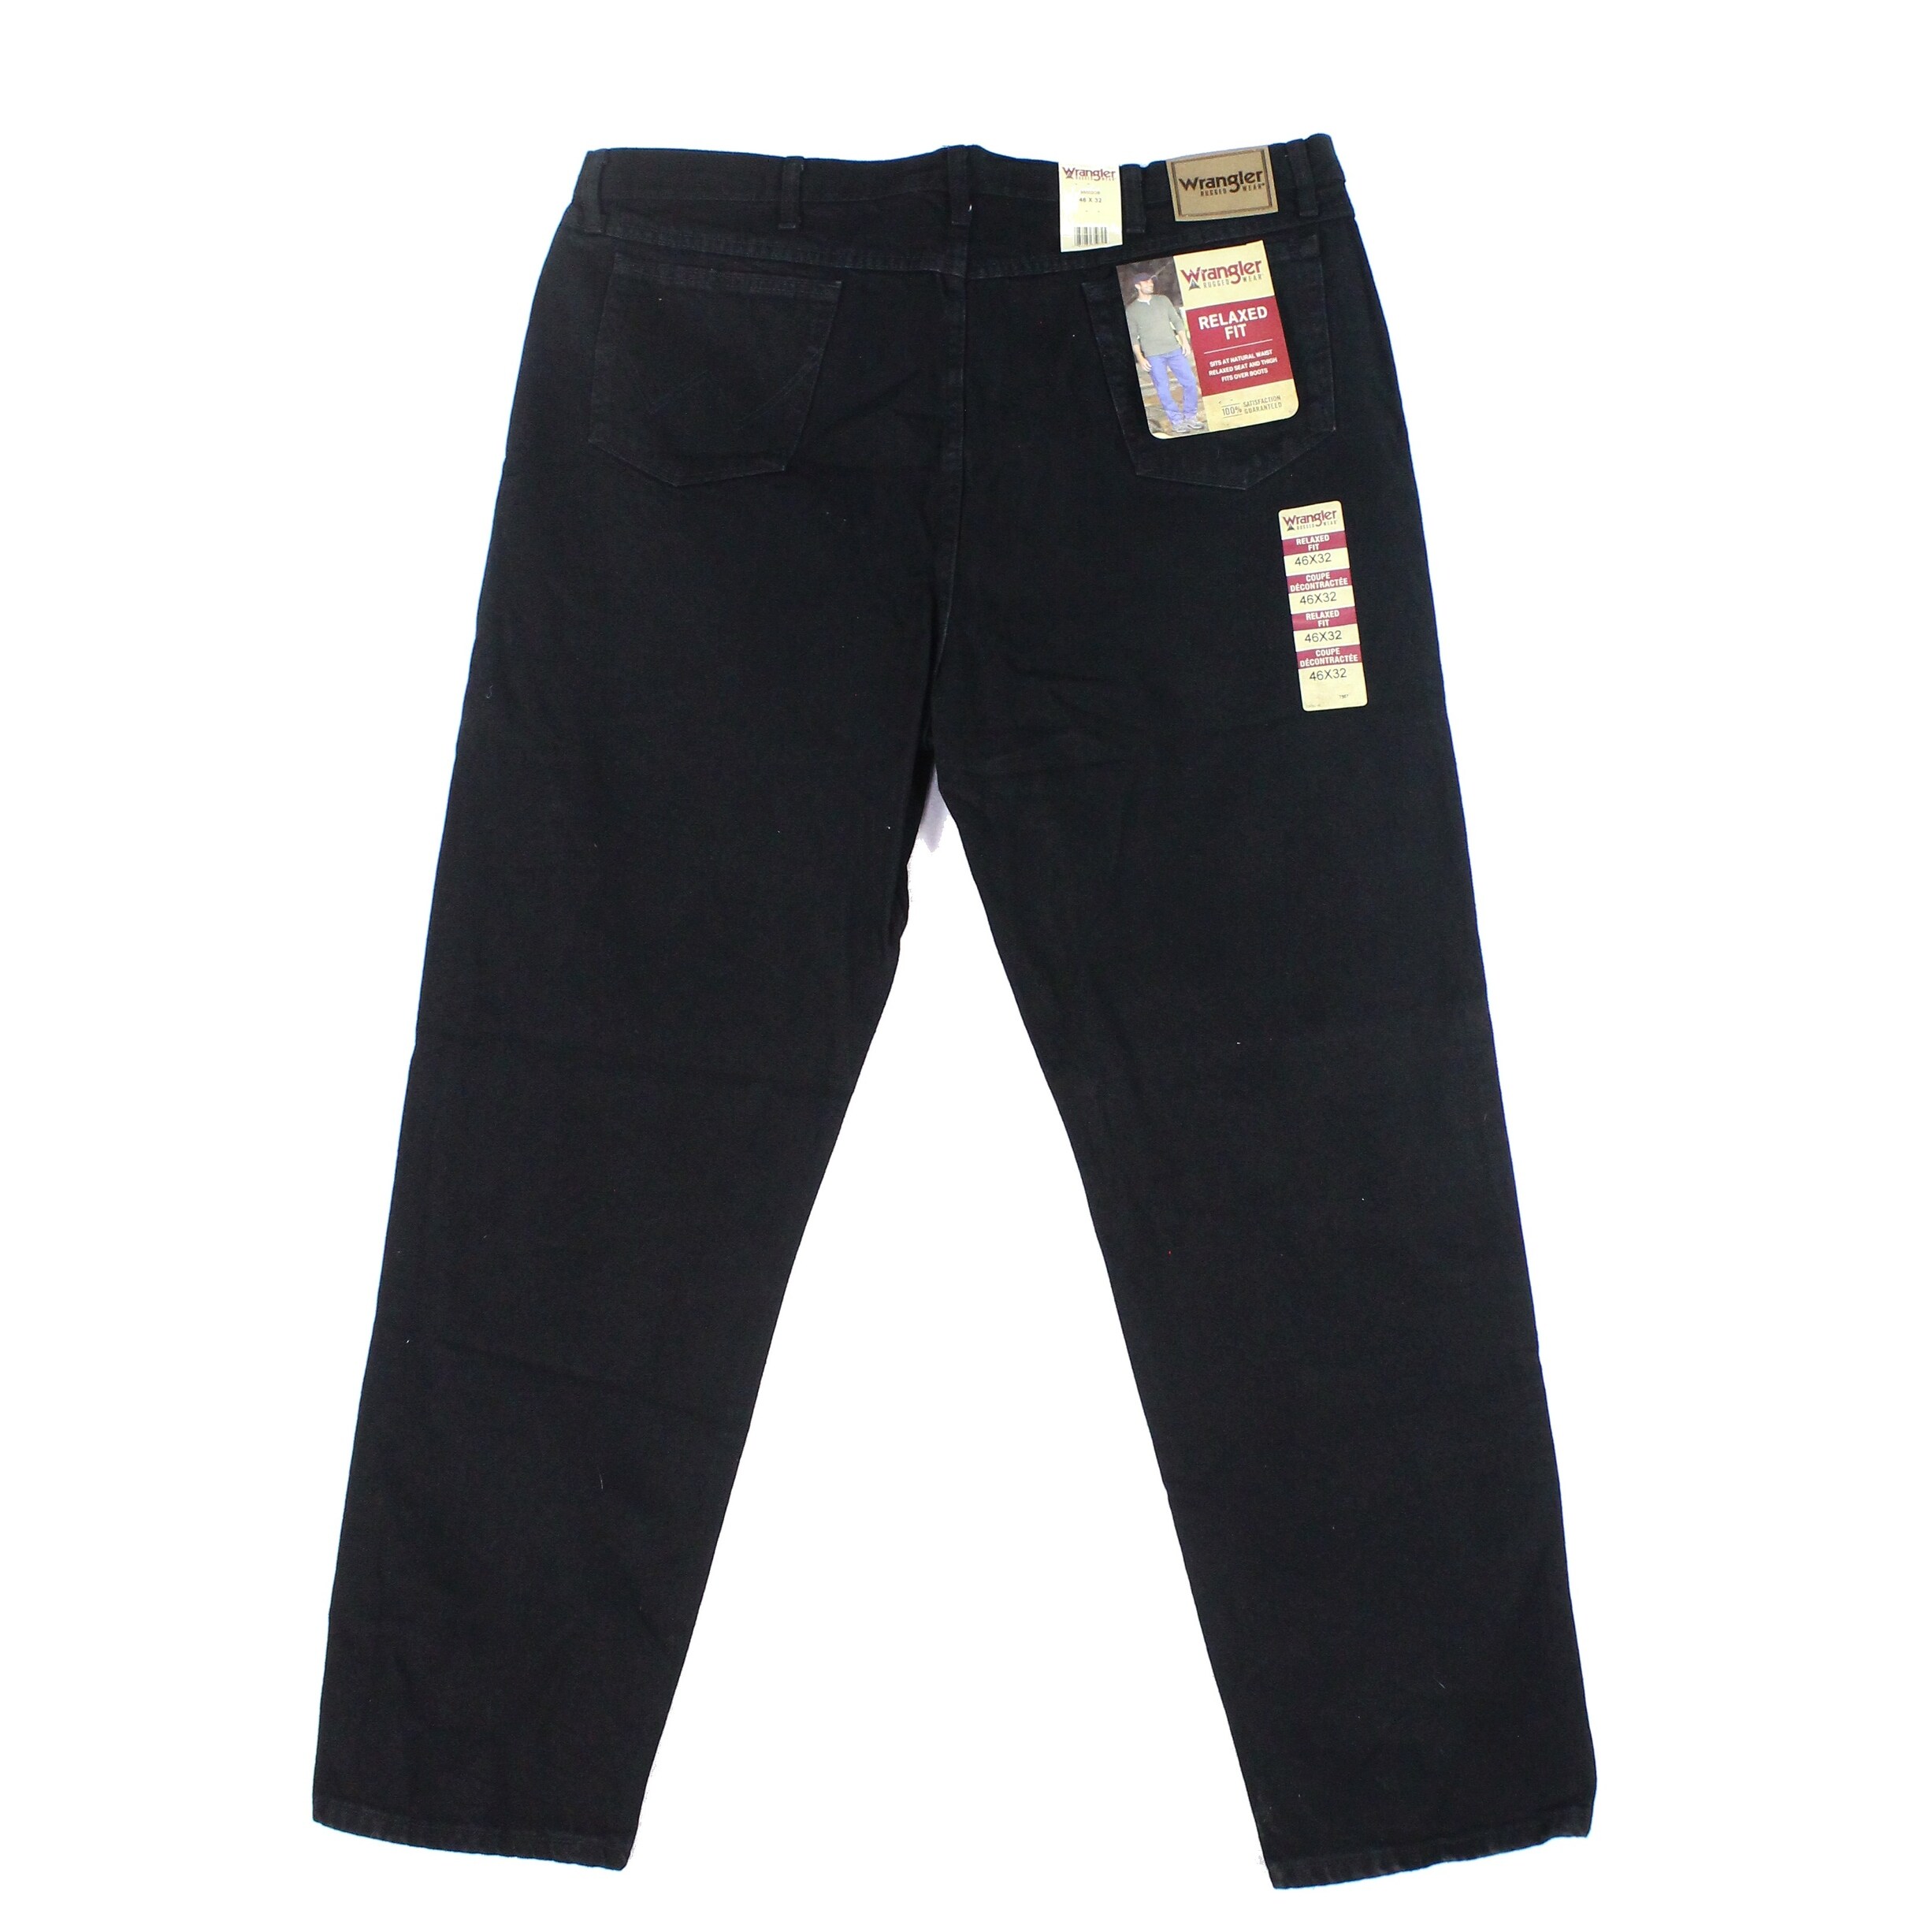 wrangler relaxed fit jeans 46x32